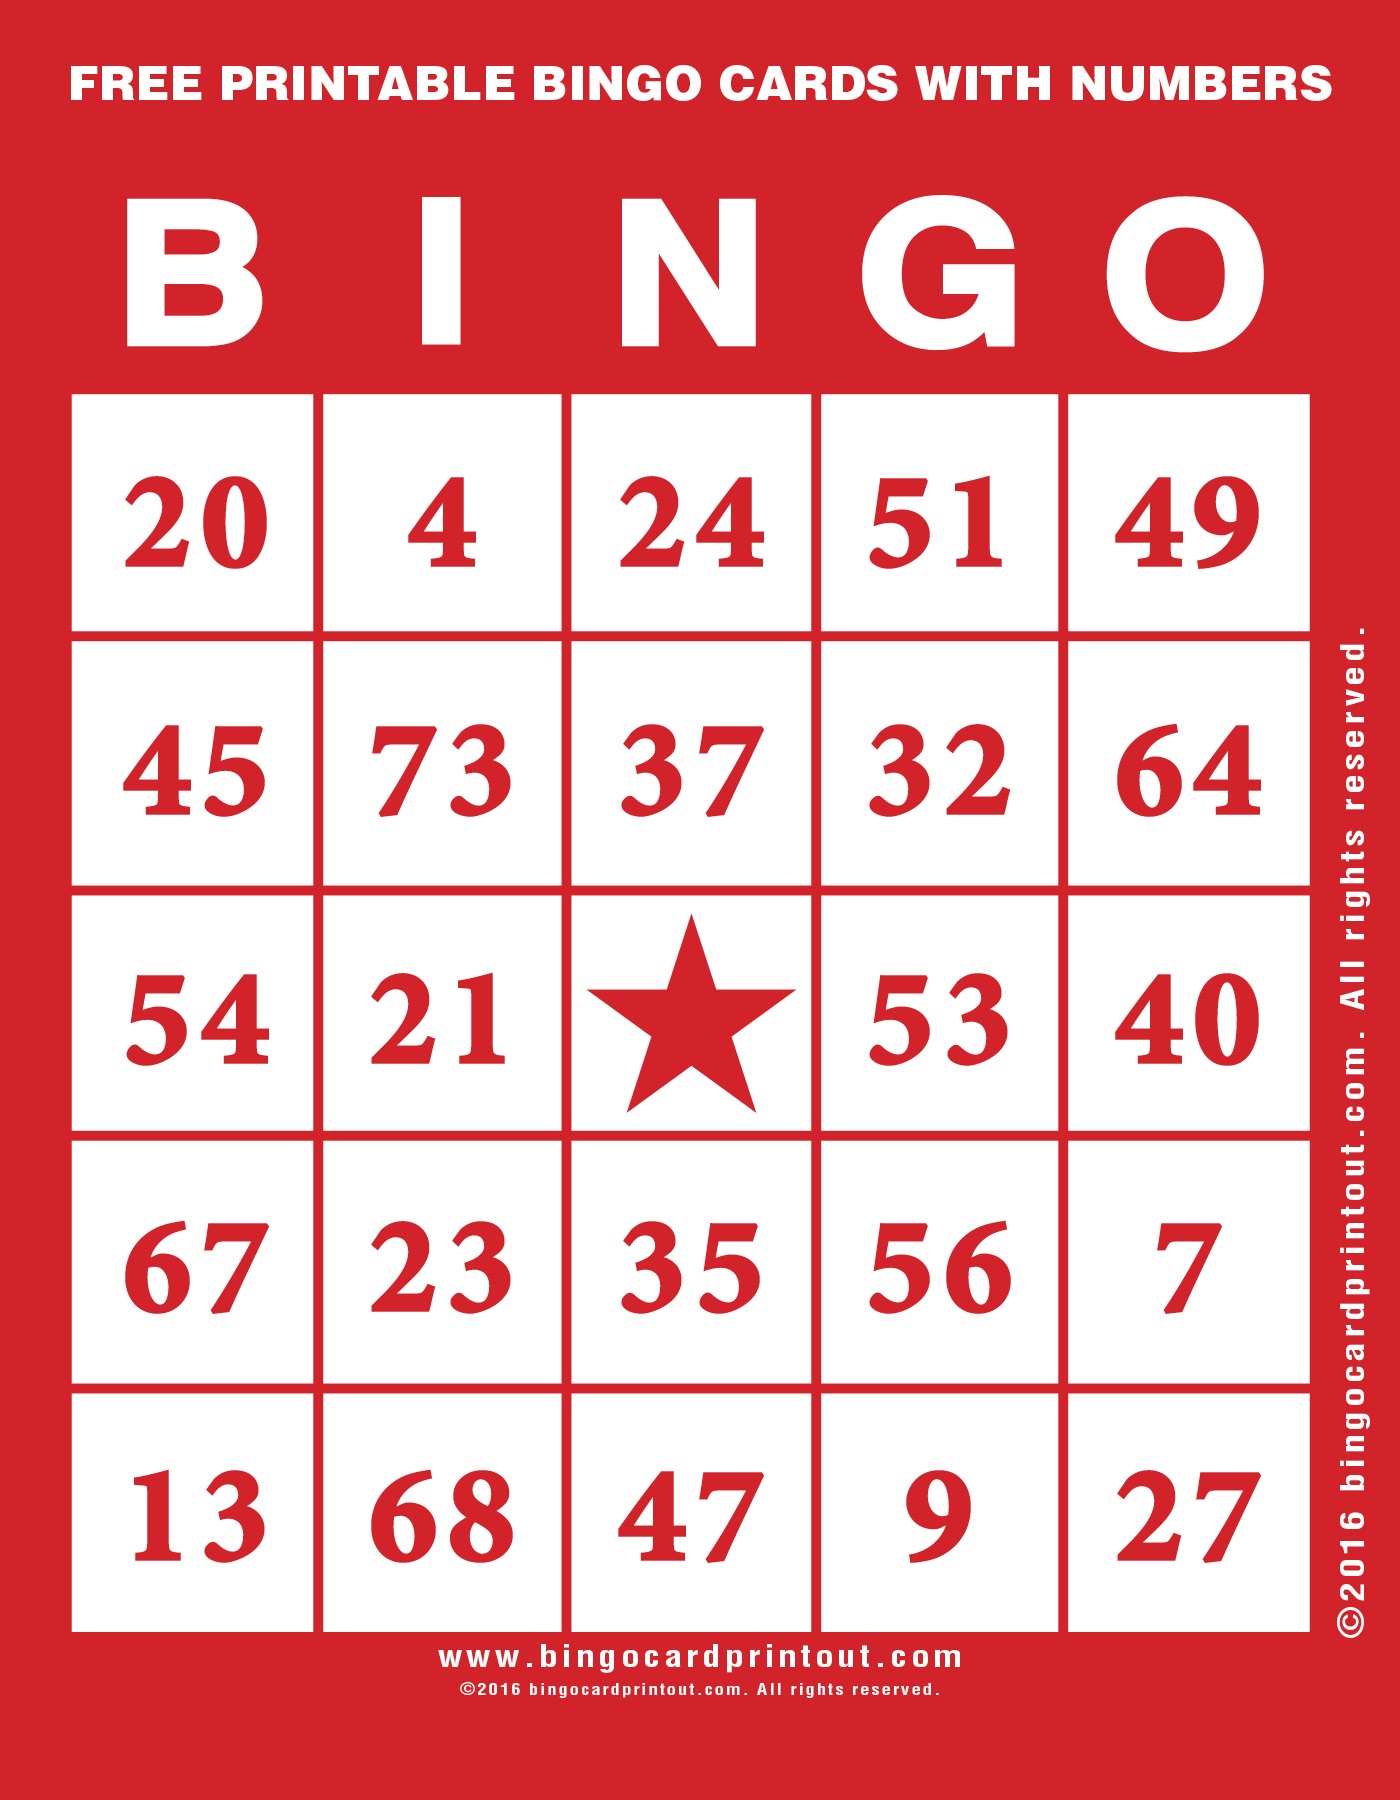 Free Printable Bingo Cards With Numbers - Bingocardprintout - Free Printable Bingo Cards With Numbers